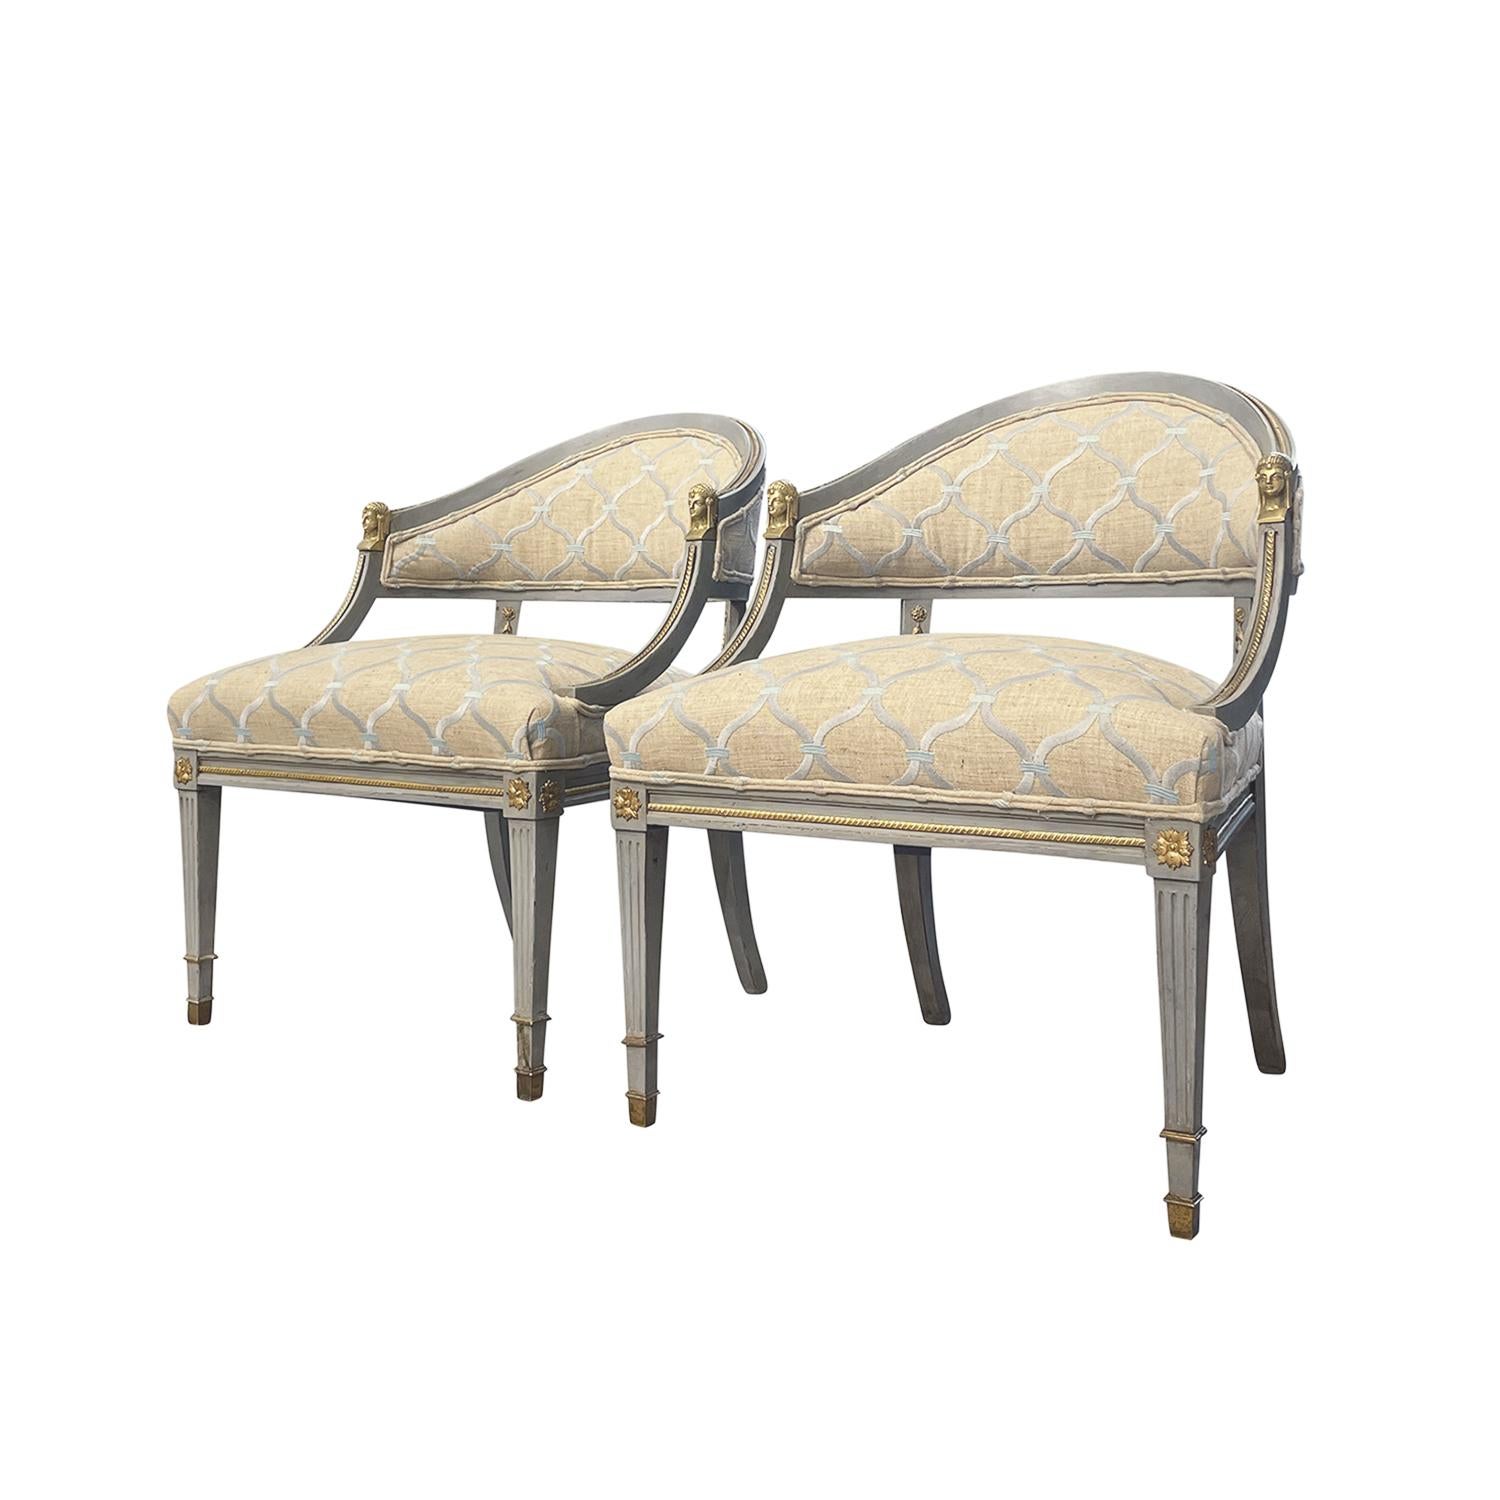 An antique pair of Swedish Gustavian armchairs made of hand crafted painted Birchwood, designed and produced most likely by Ephraim Ståhl in good condition. The Scandinavian side chairs have an half-rounded padded backrest, decorated with slim